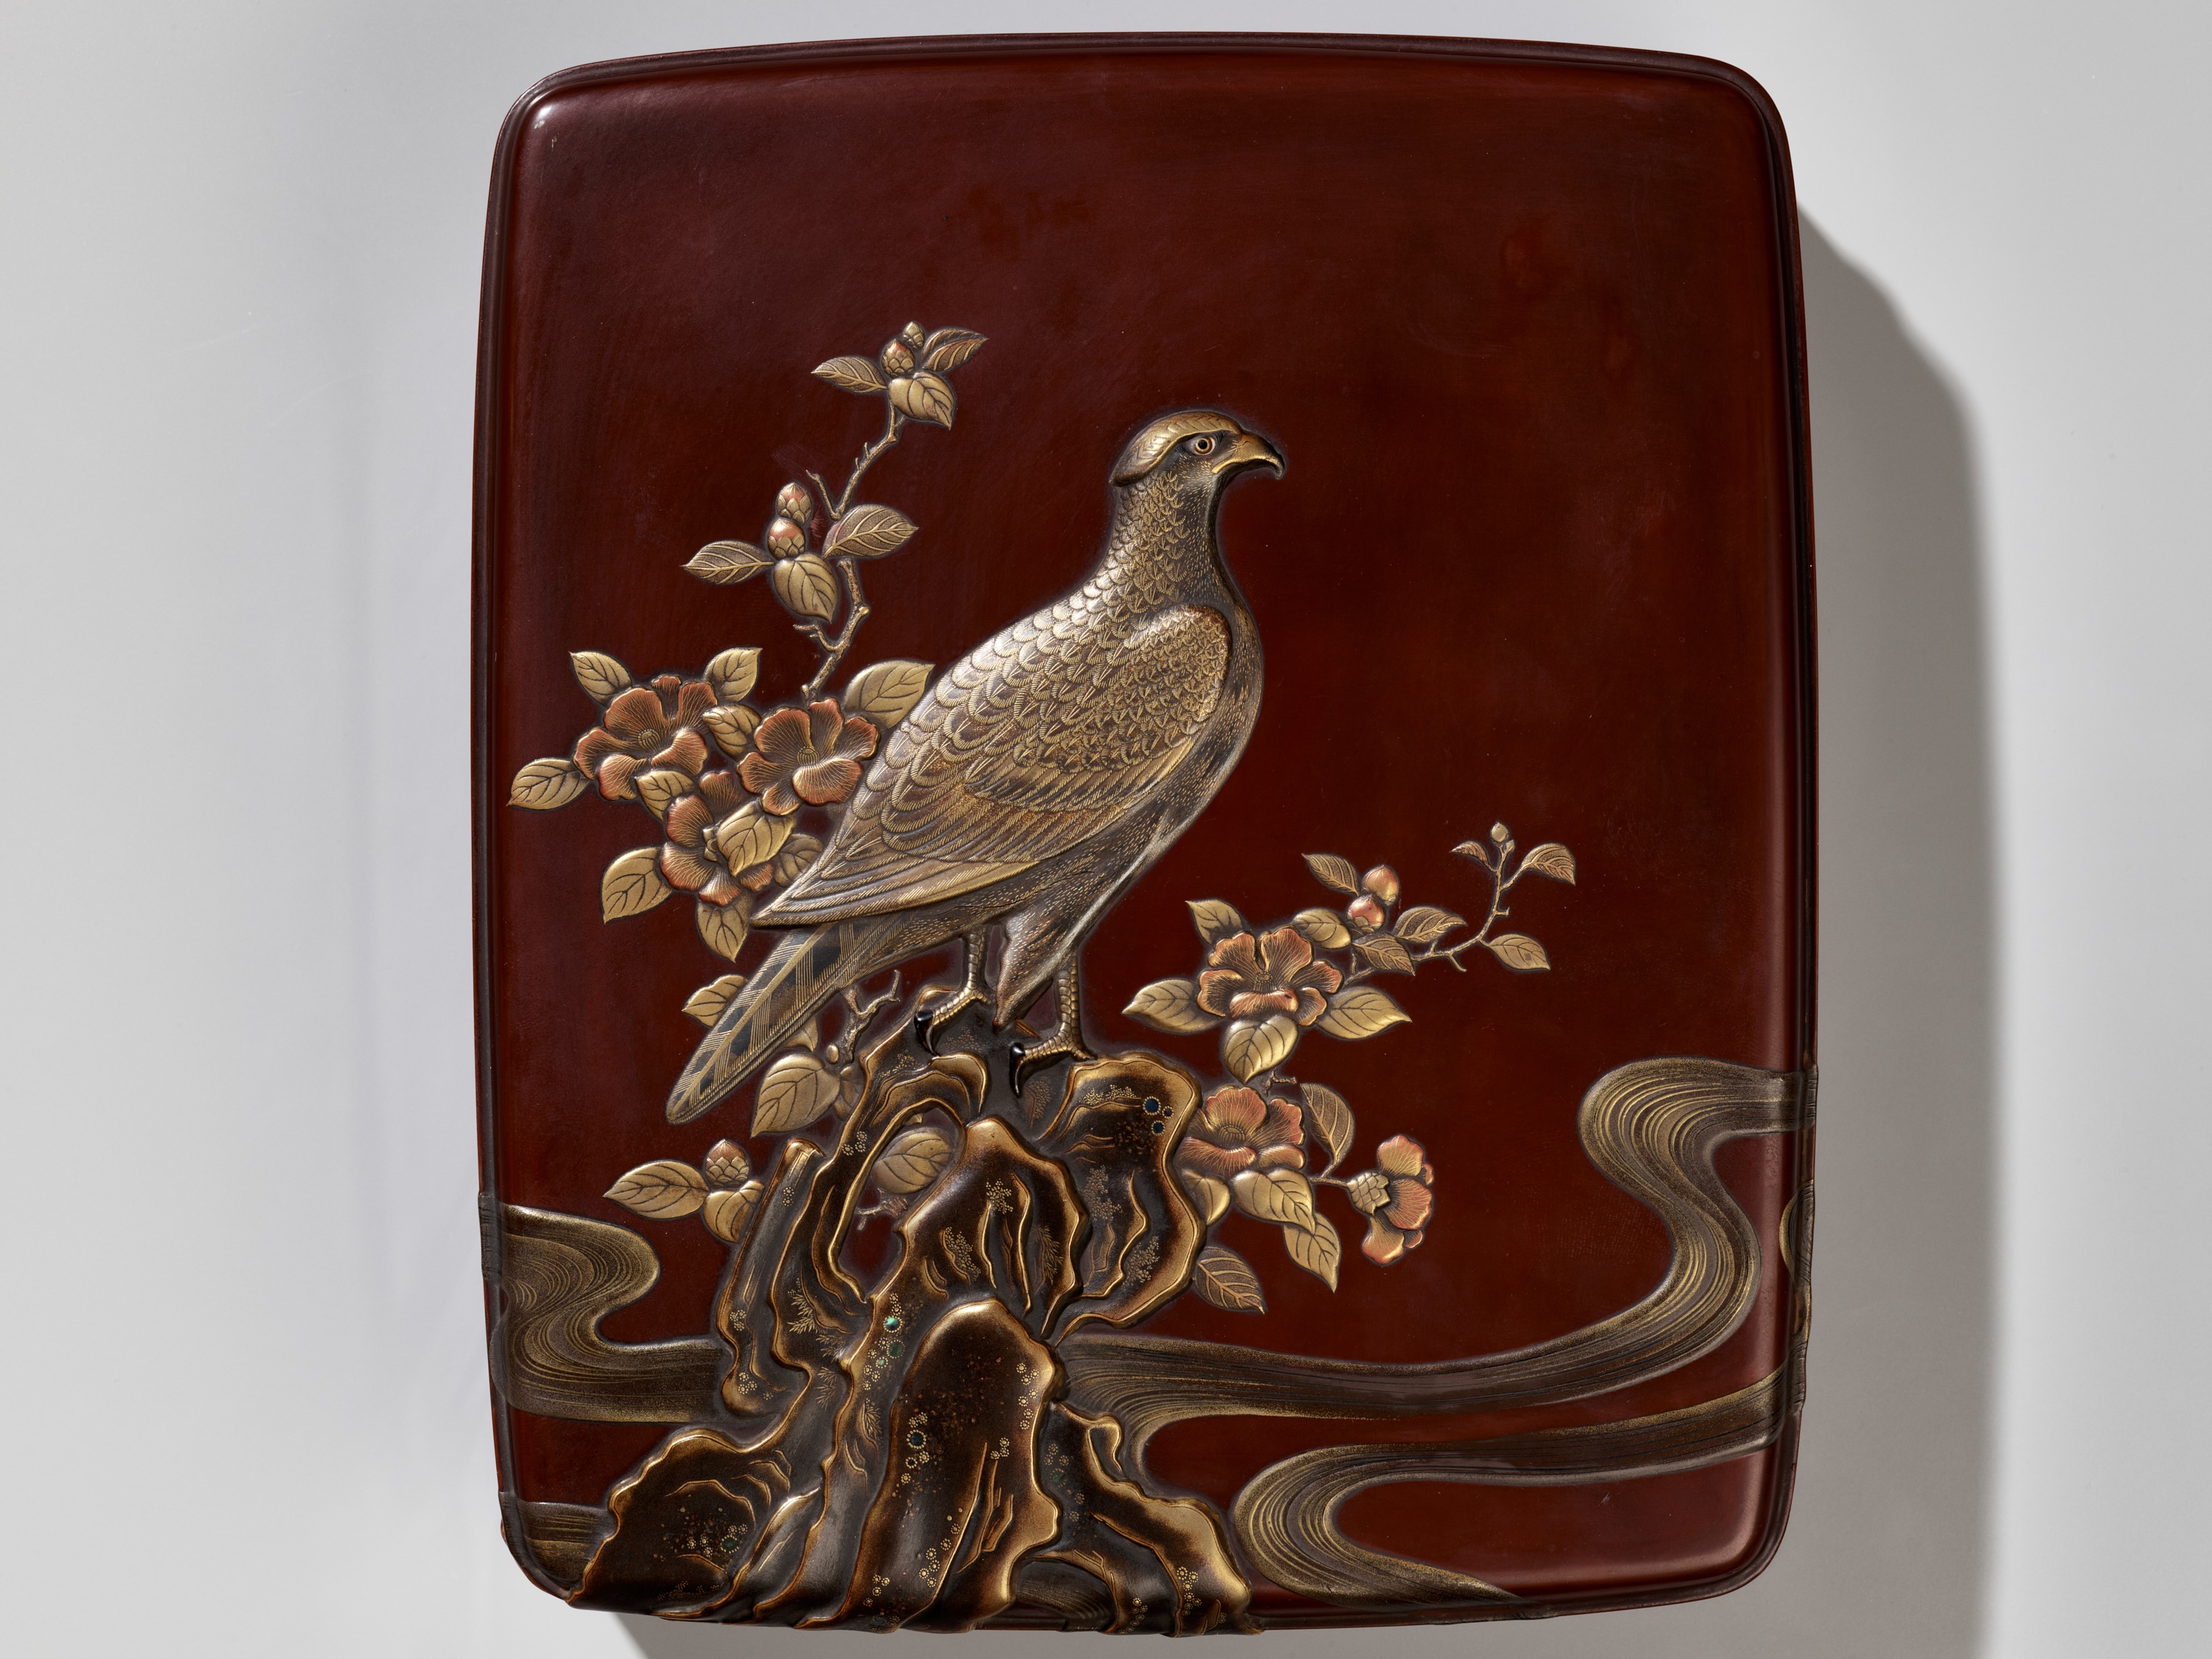 SHOGAKU: A SUPERB LACQUER SUZURIBAKO DEPICTING AN AUTUMNAL SCENE WITH FALCON AND SPARROWS - Image 7 of 14